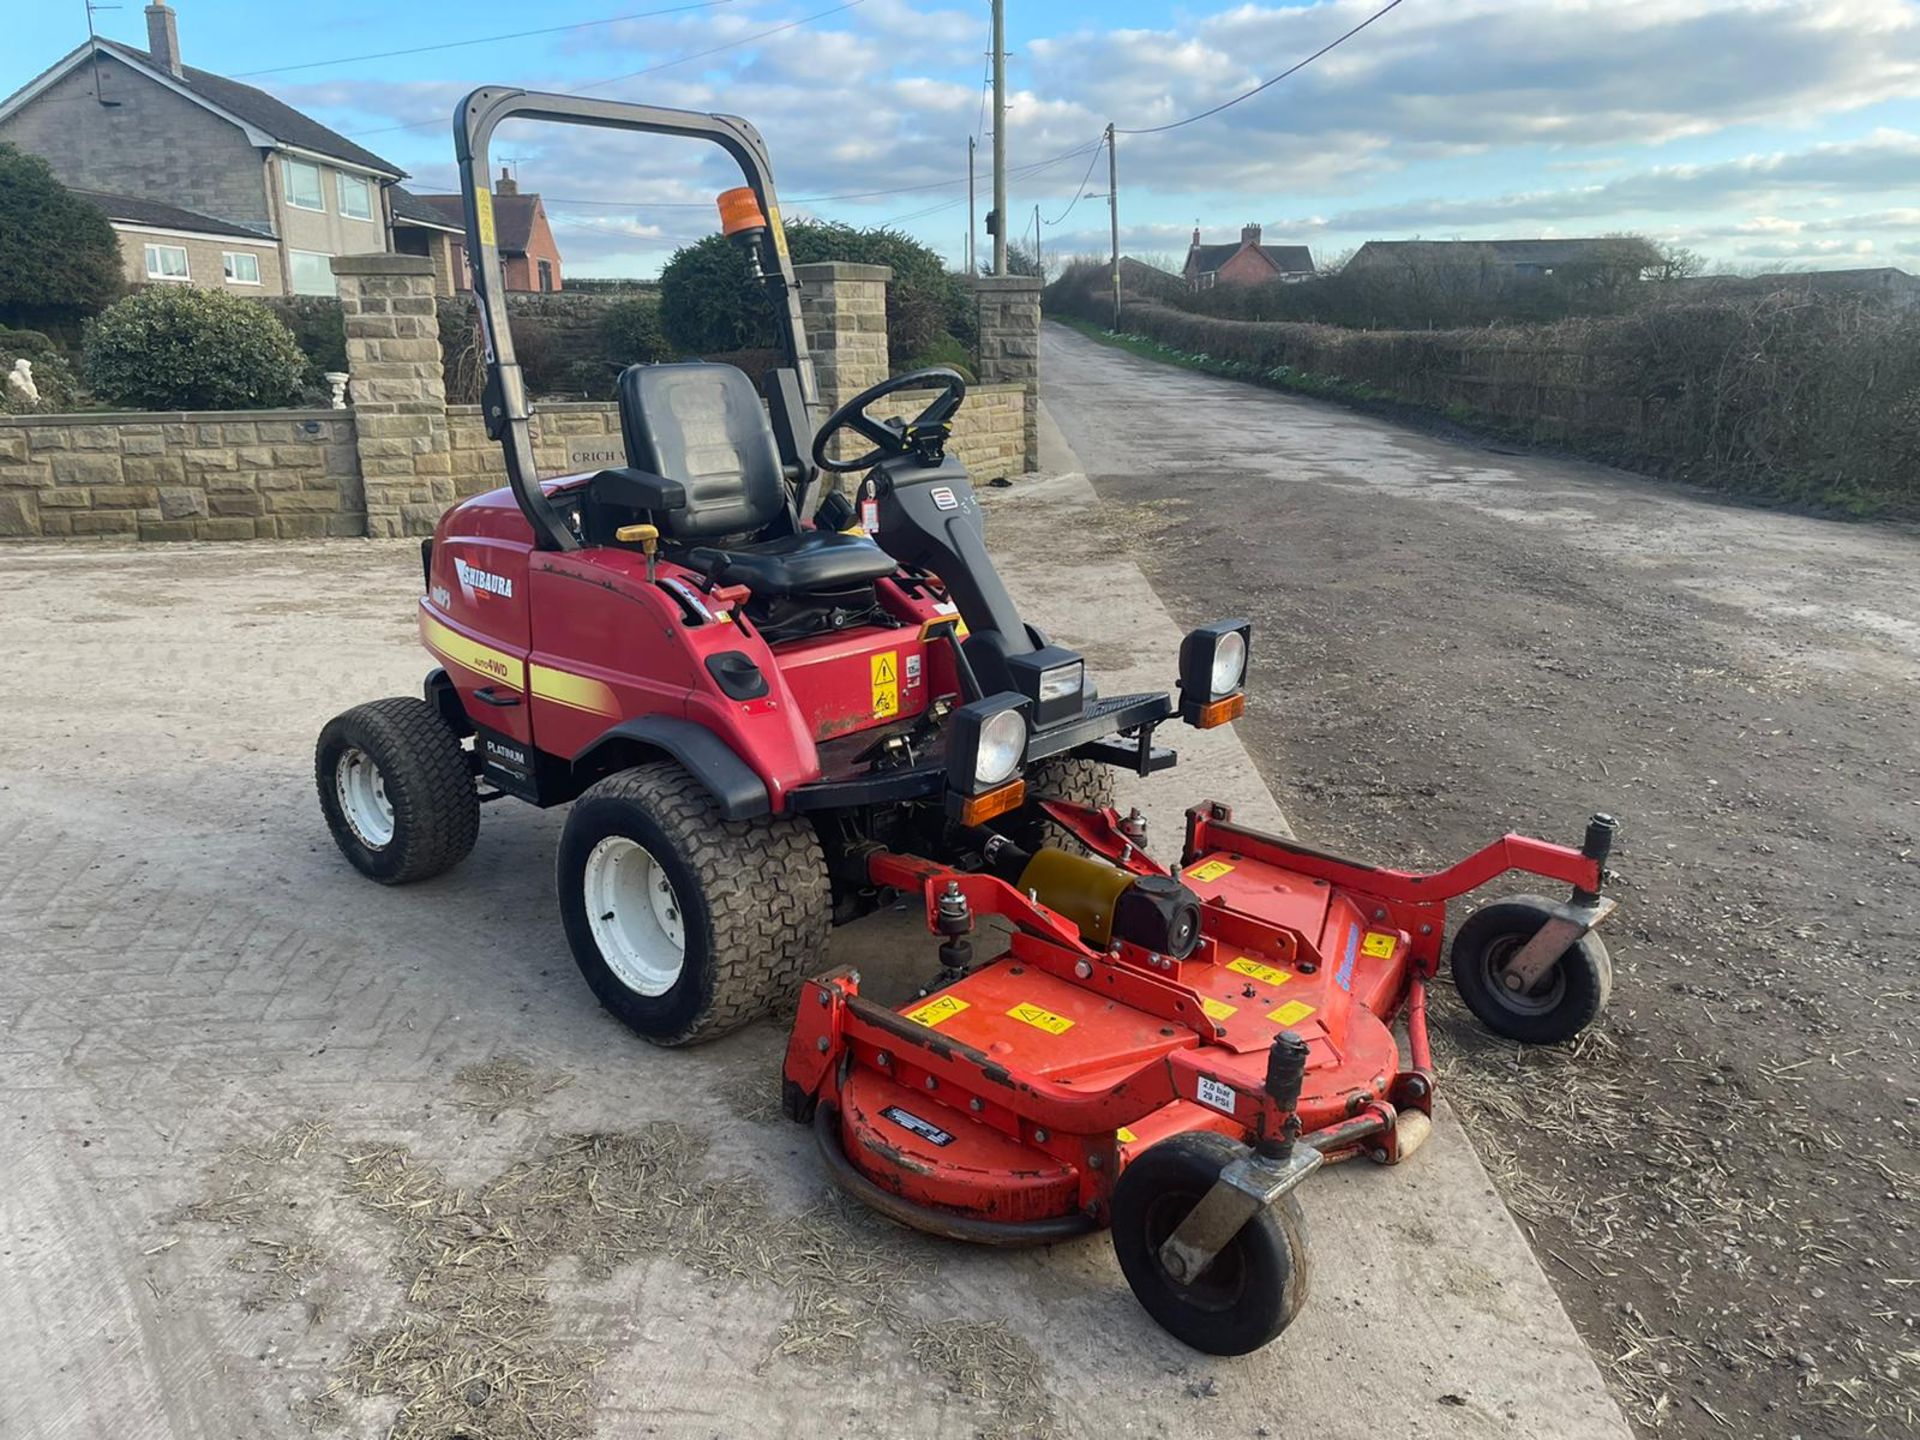 2012 SHIBAURA CM374 OUTFRONT RIDE ON MOWER, RUNS, DRIVES AND CUTS, IN USED BUT GOOD CONDITION - Image 2 of 12